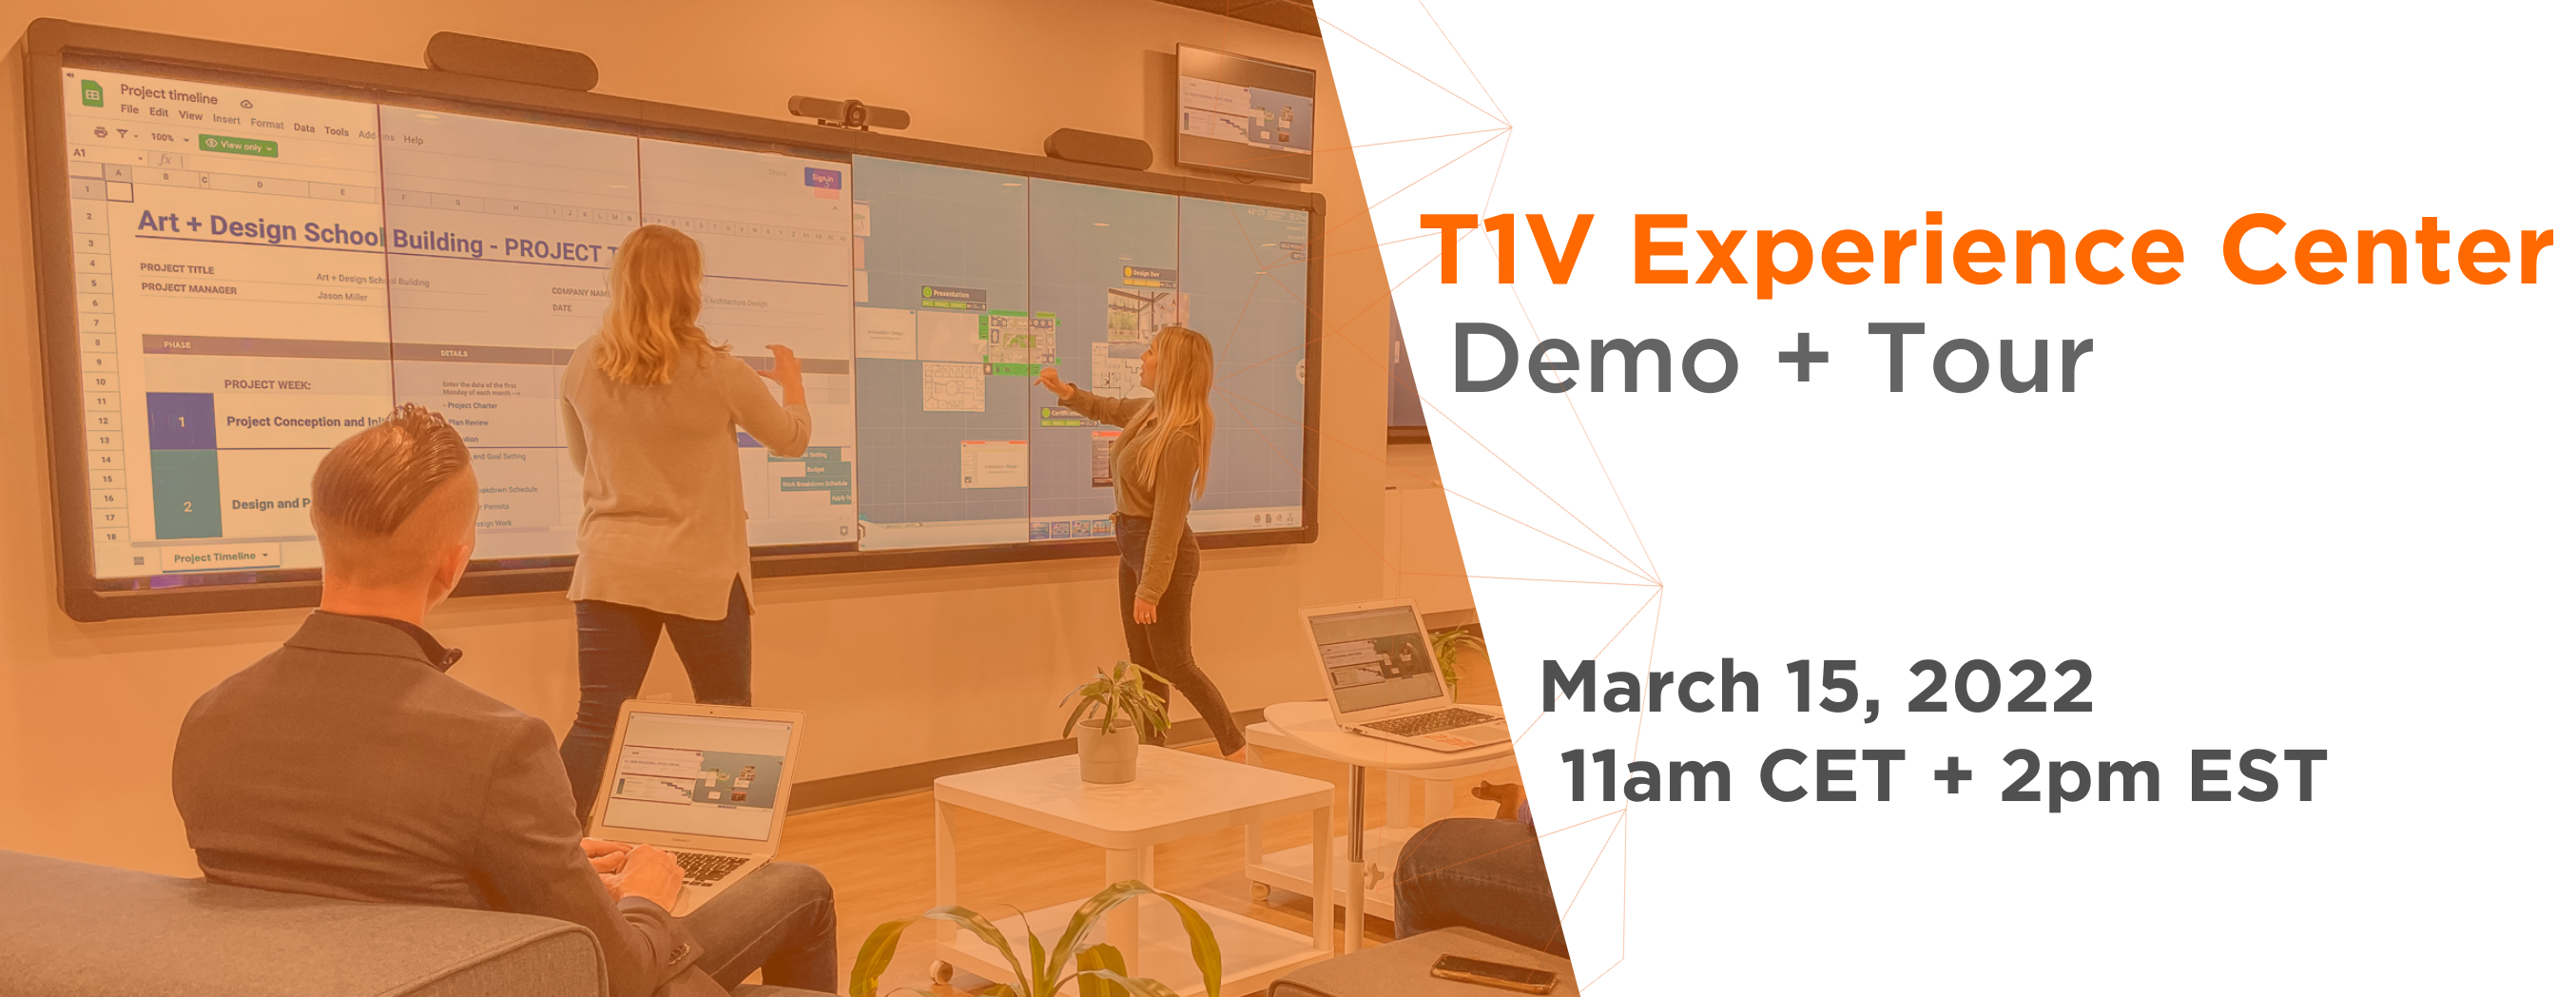 t1v-experience-center-demo-and-tour-webinar-03-15-2022-Email